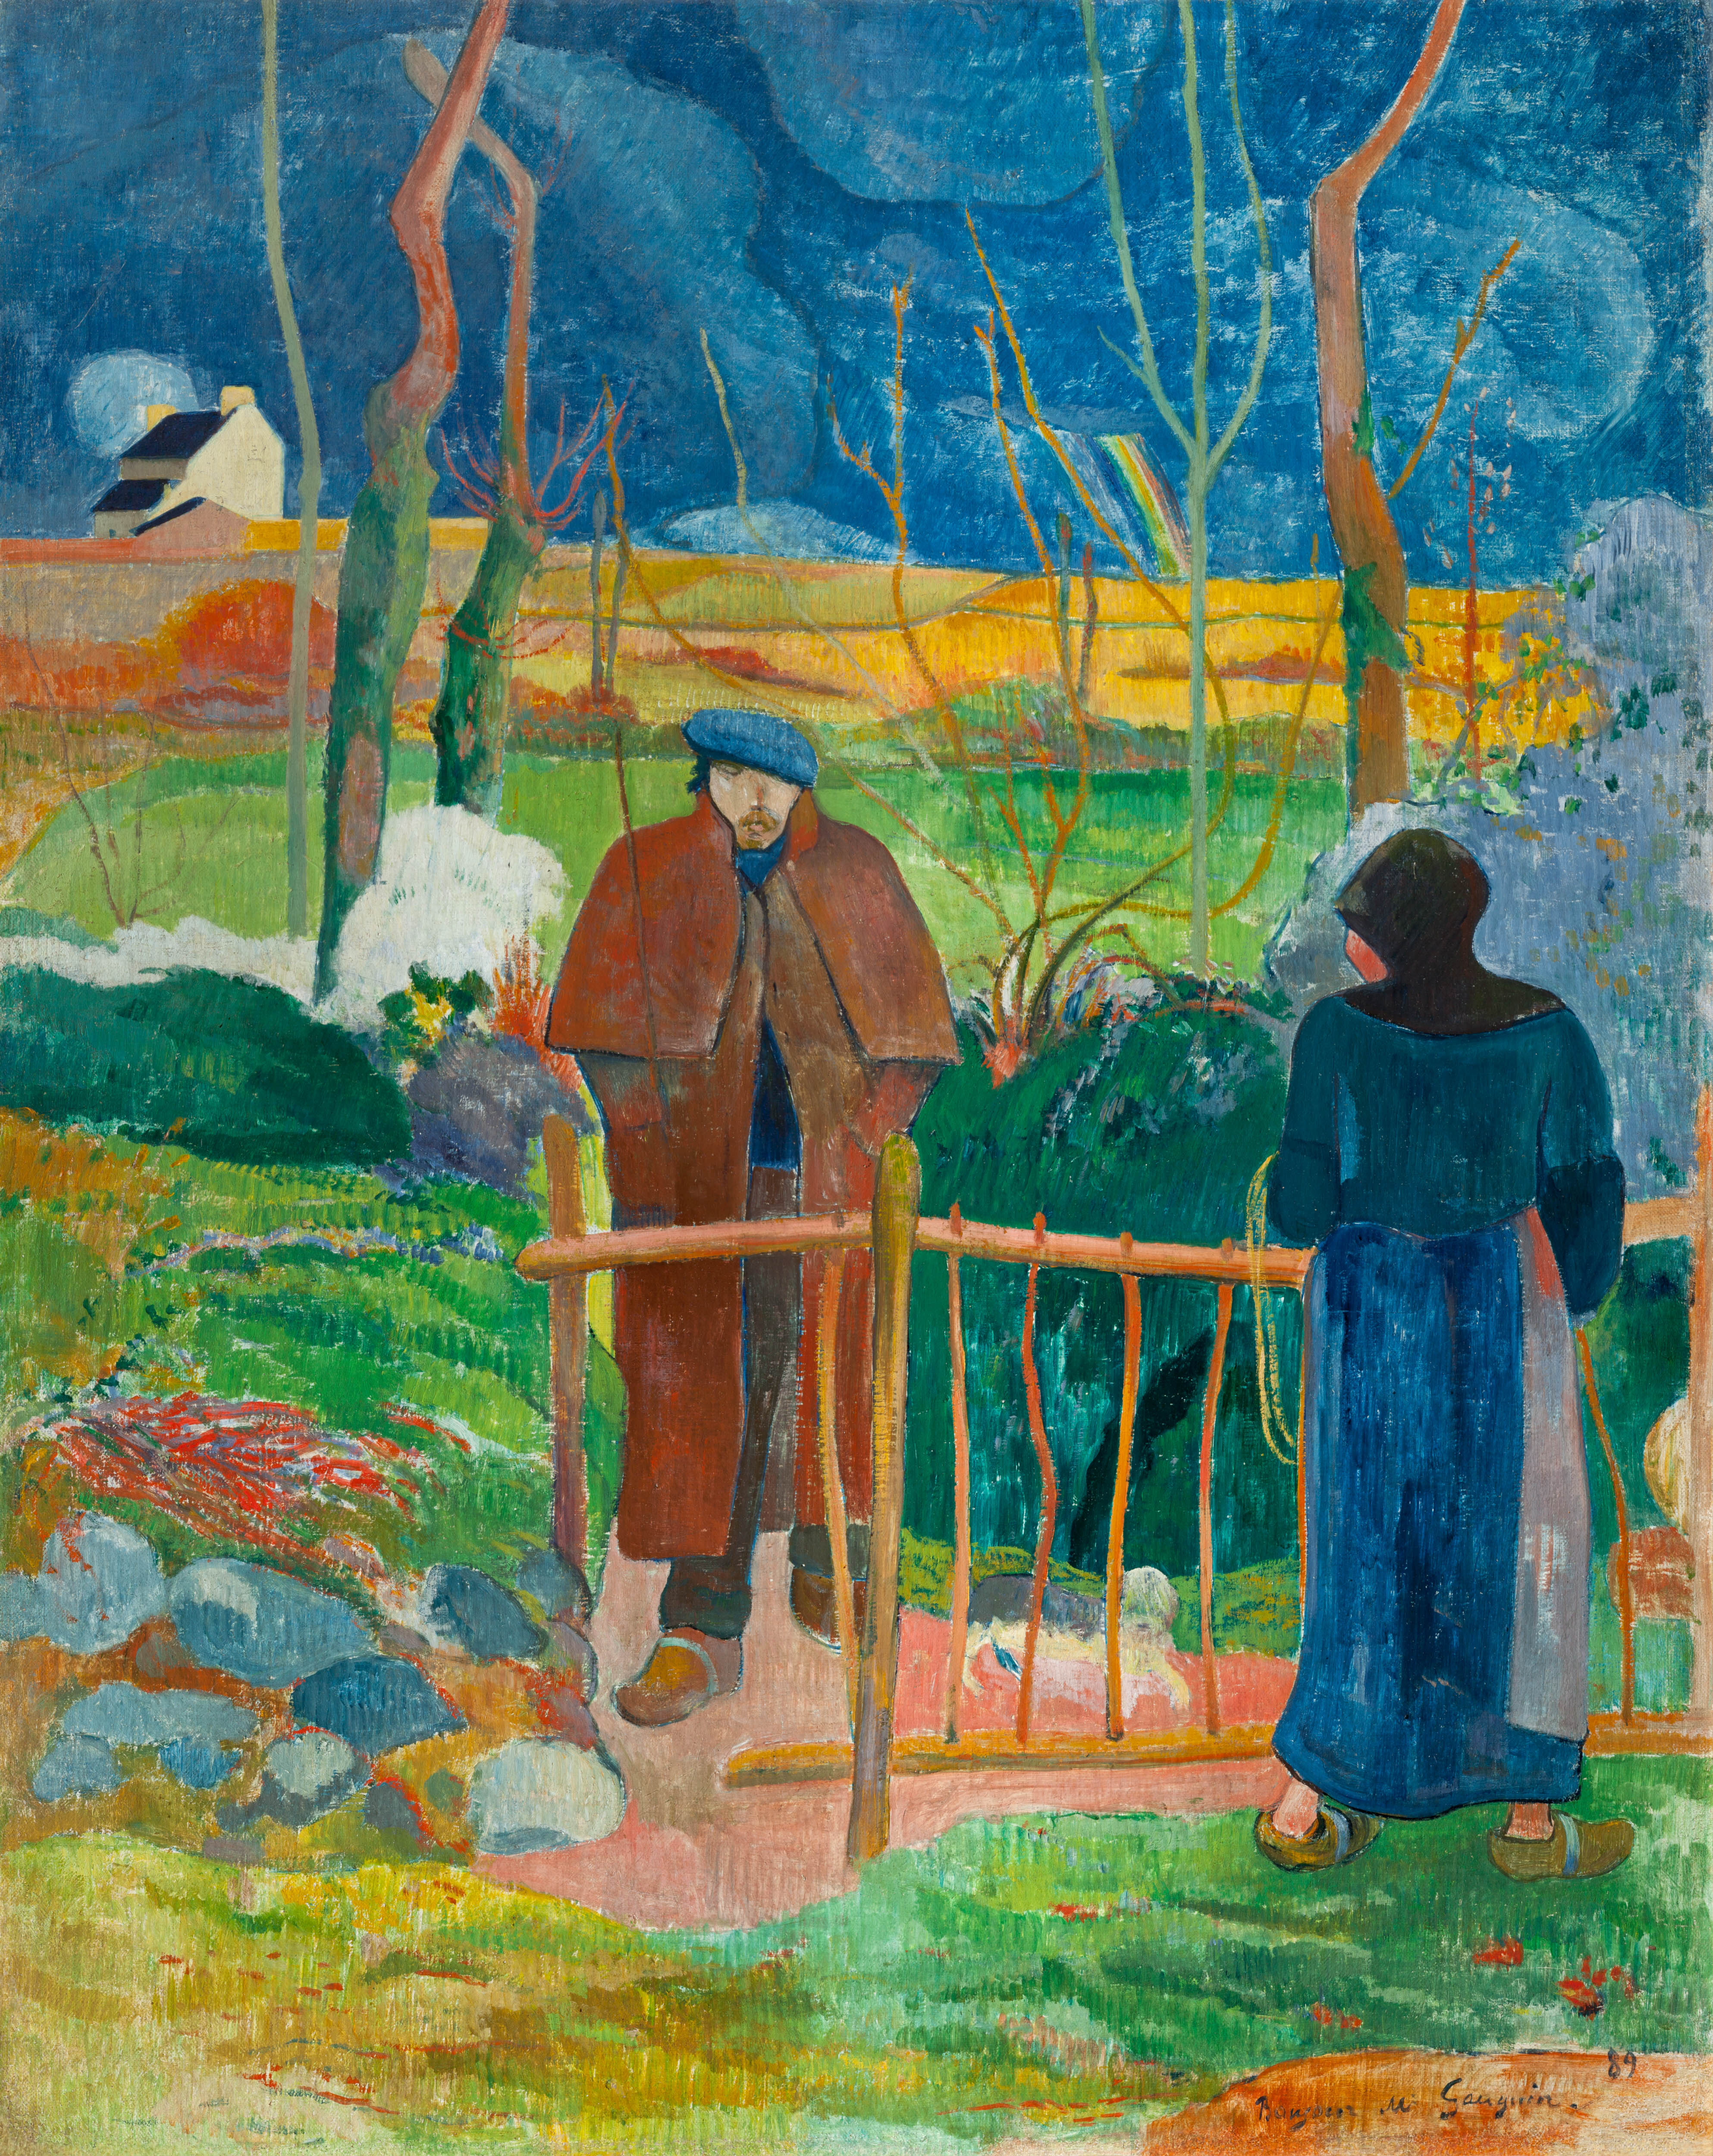 Painting of two people talkeing at a bridge